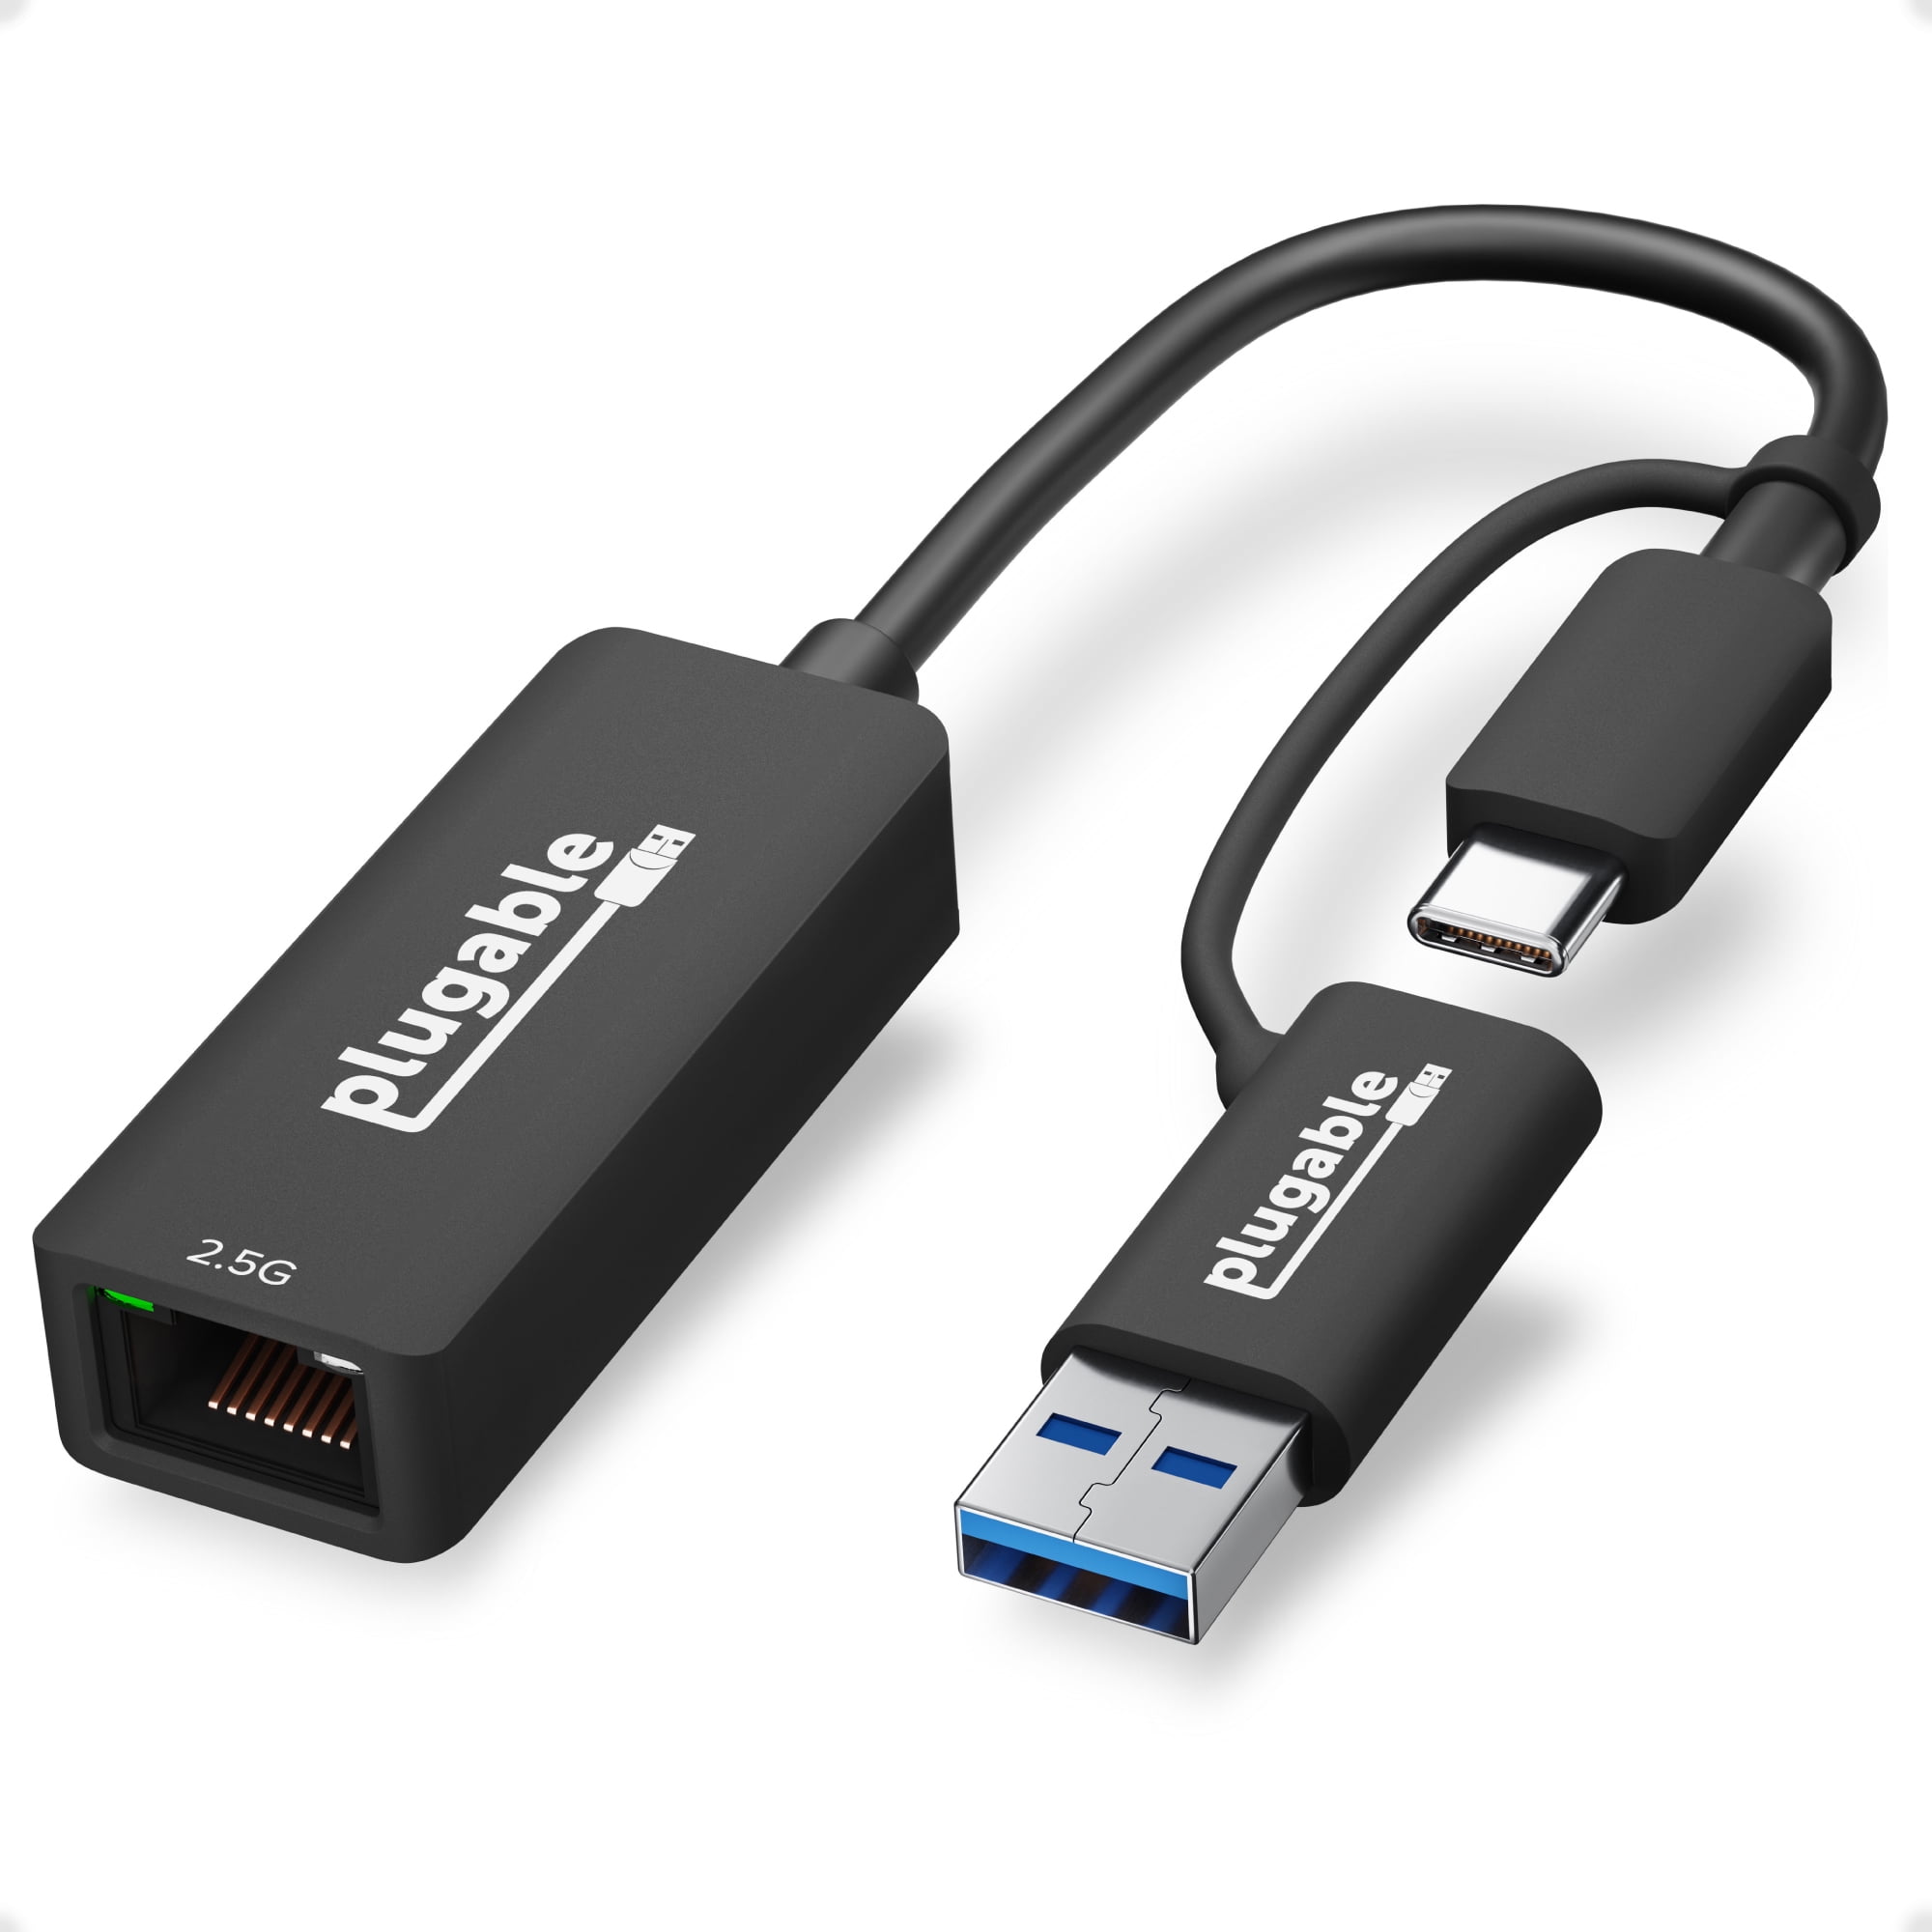 Plugable 2.5G USB C and USB to Ethernet Adapter, 2-in-1 Adapter Compatible  with USB-C Thunderbolt 3 or USB 3.0, USB-C to RJ45 2.5 Gigabit LAN  Ethernet, Compatible with Mac and Windows 